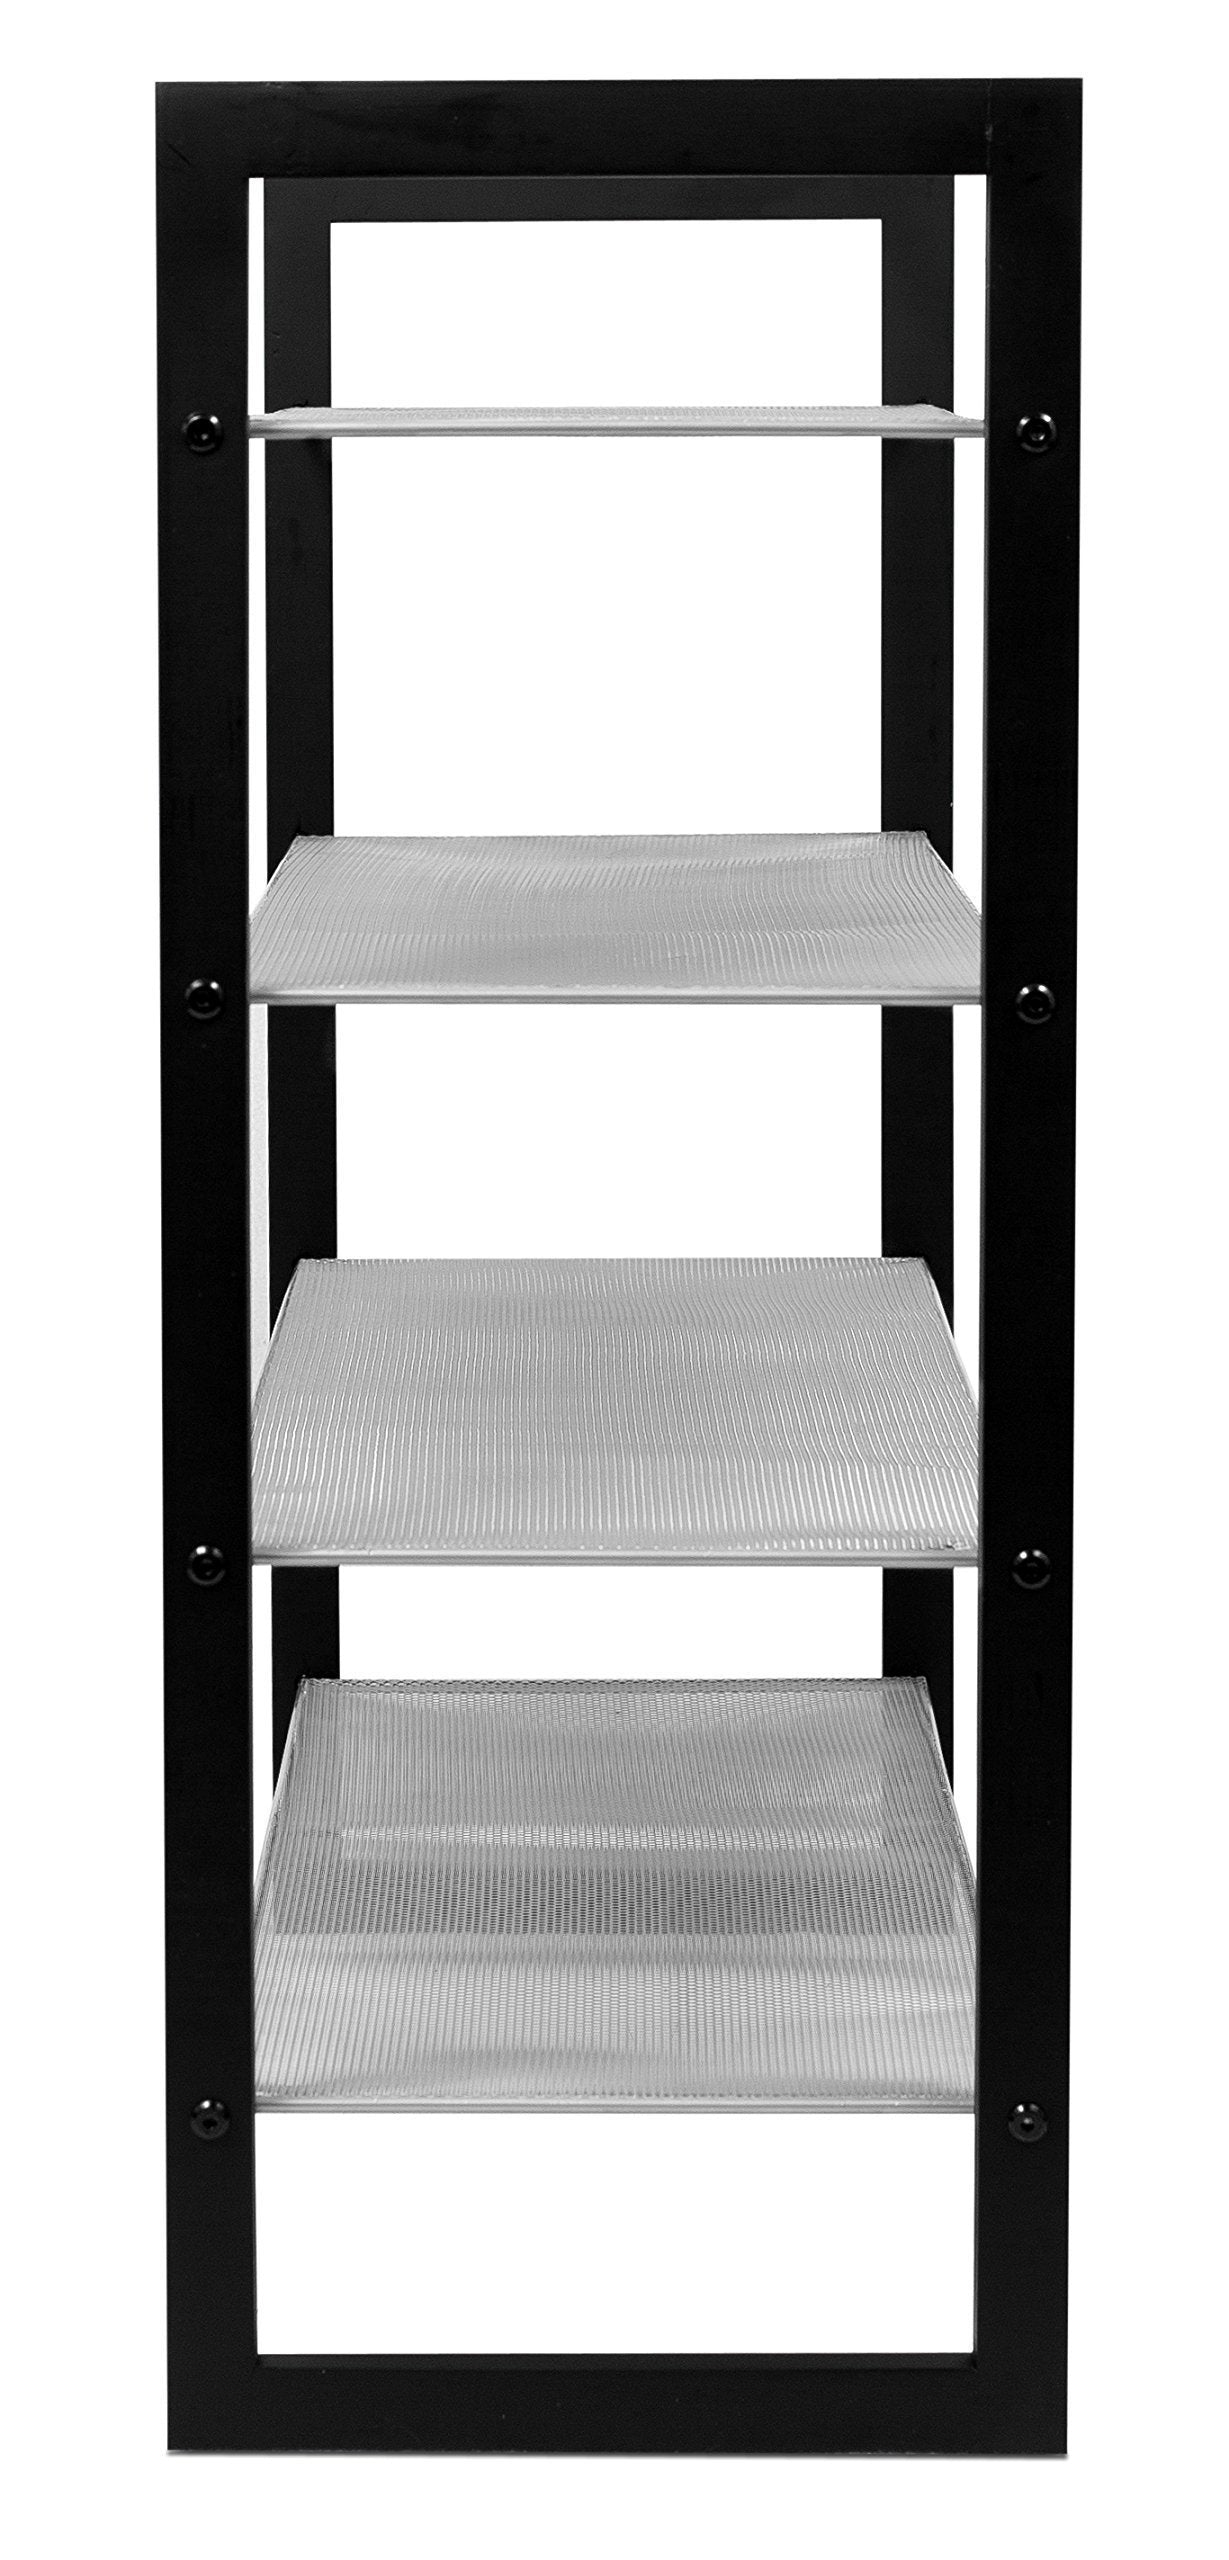 Select nice internets best mesh shoe rack 4 tier free standing metal wood shoe organizer closet and entryway fits 16 pairs of shoes black silver